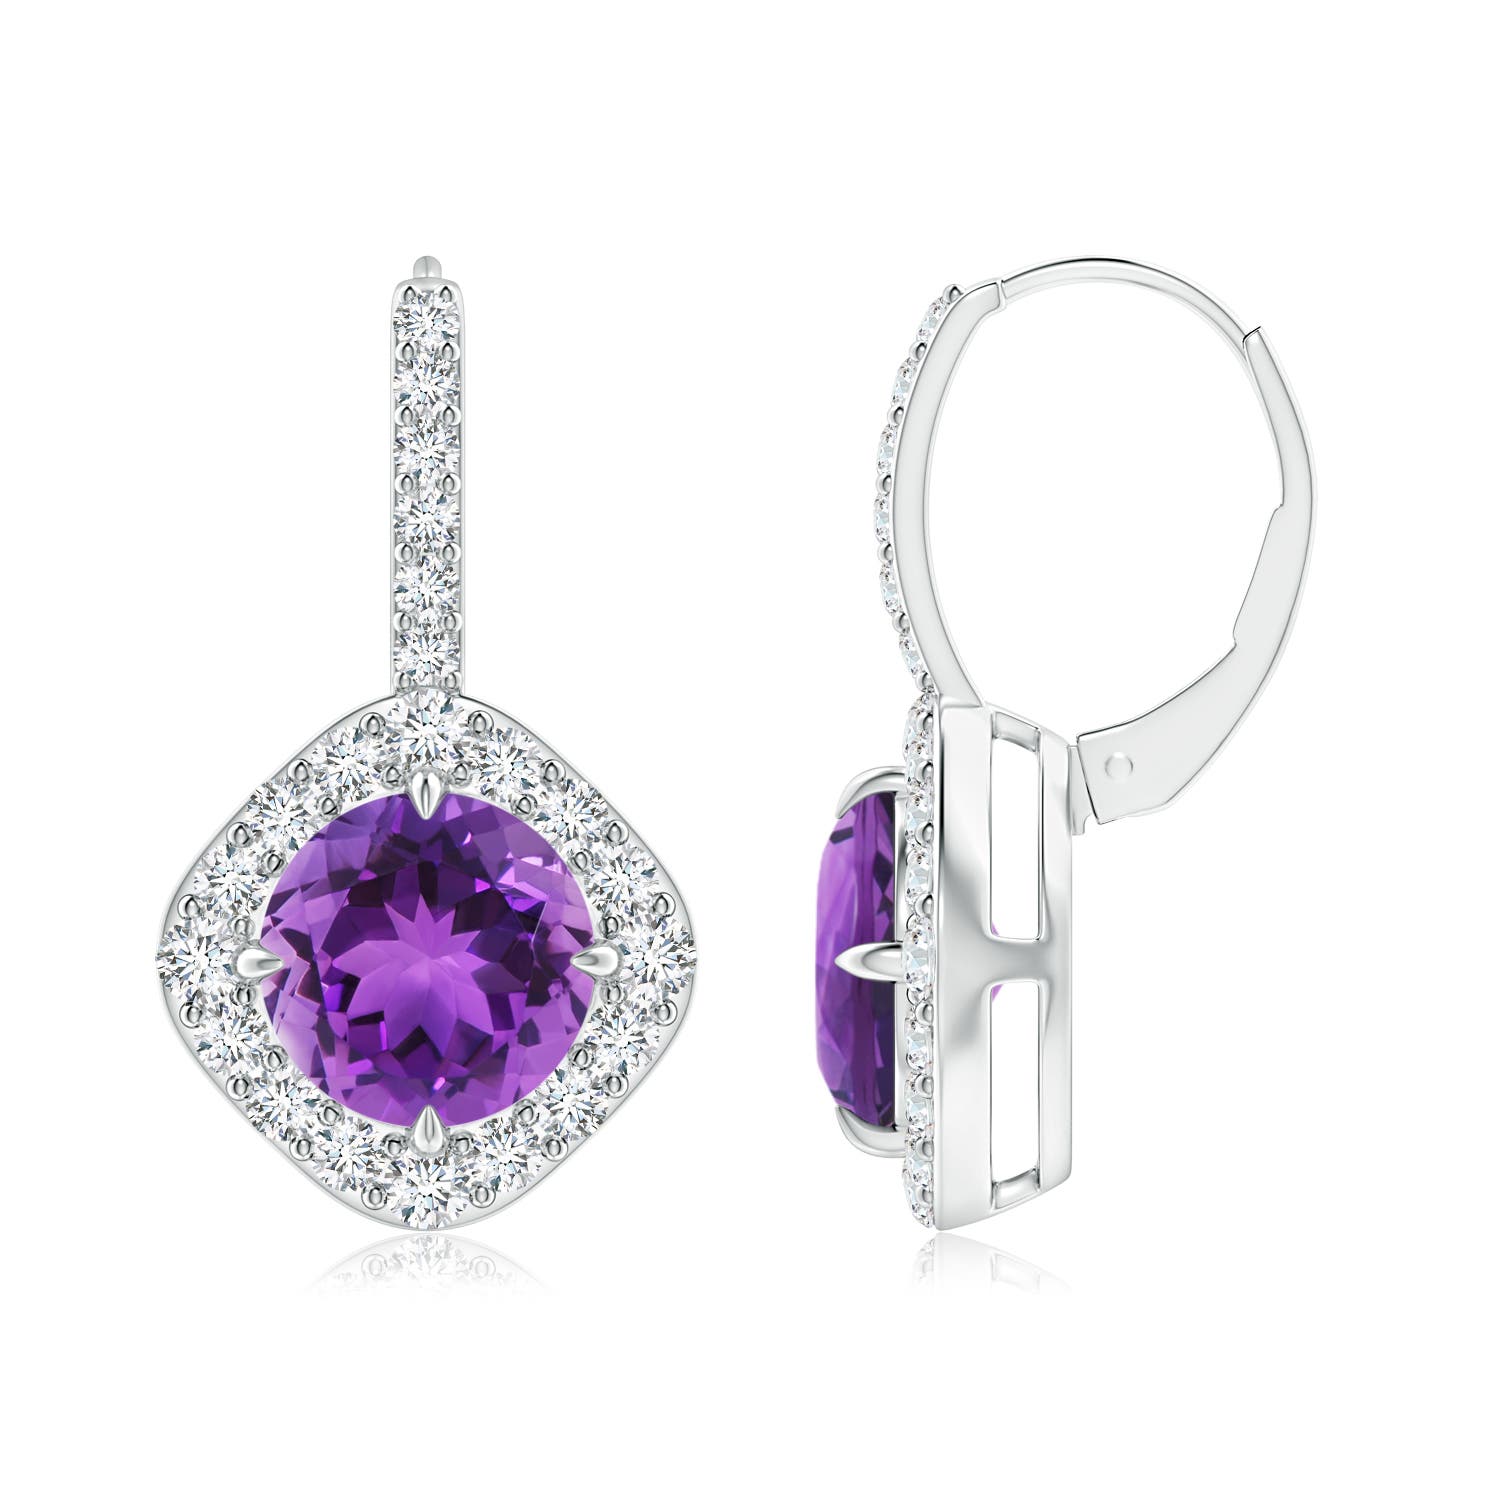 AAA - Amethyst / 4.15 CT / 14 KT White Gold